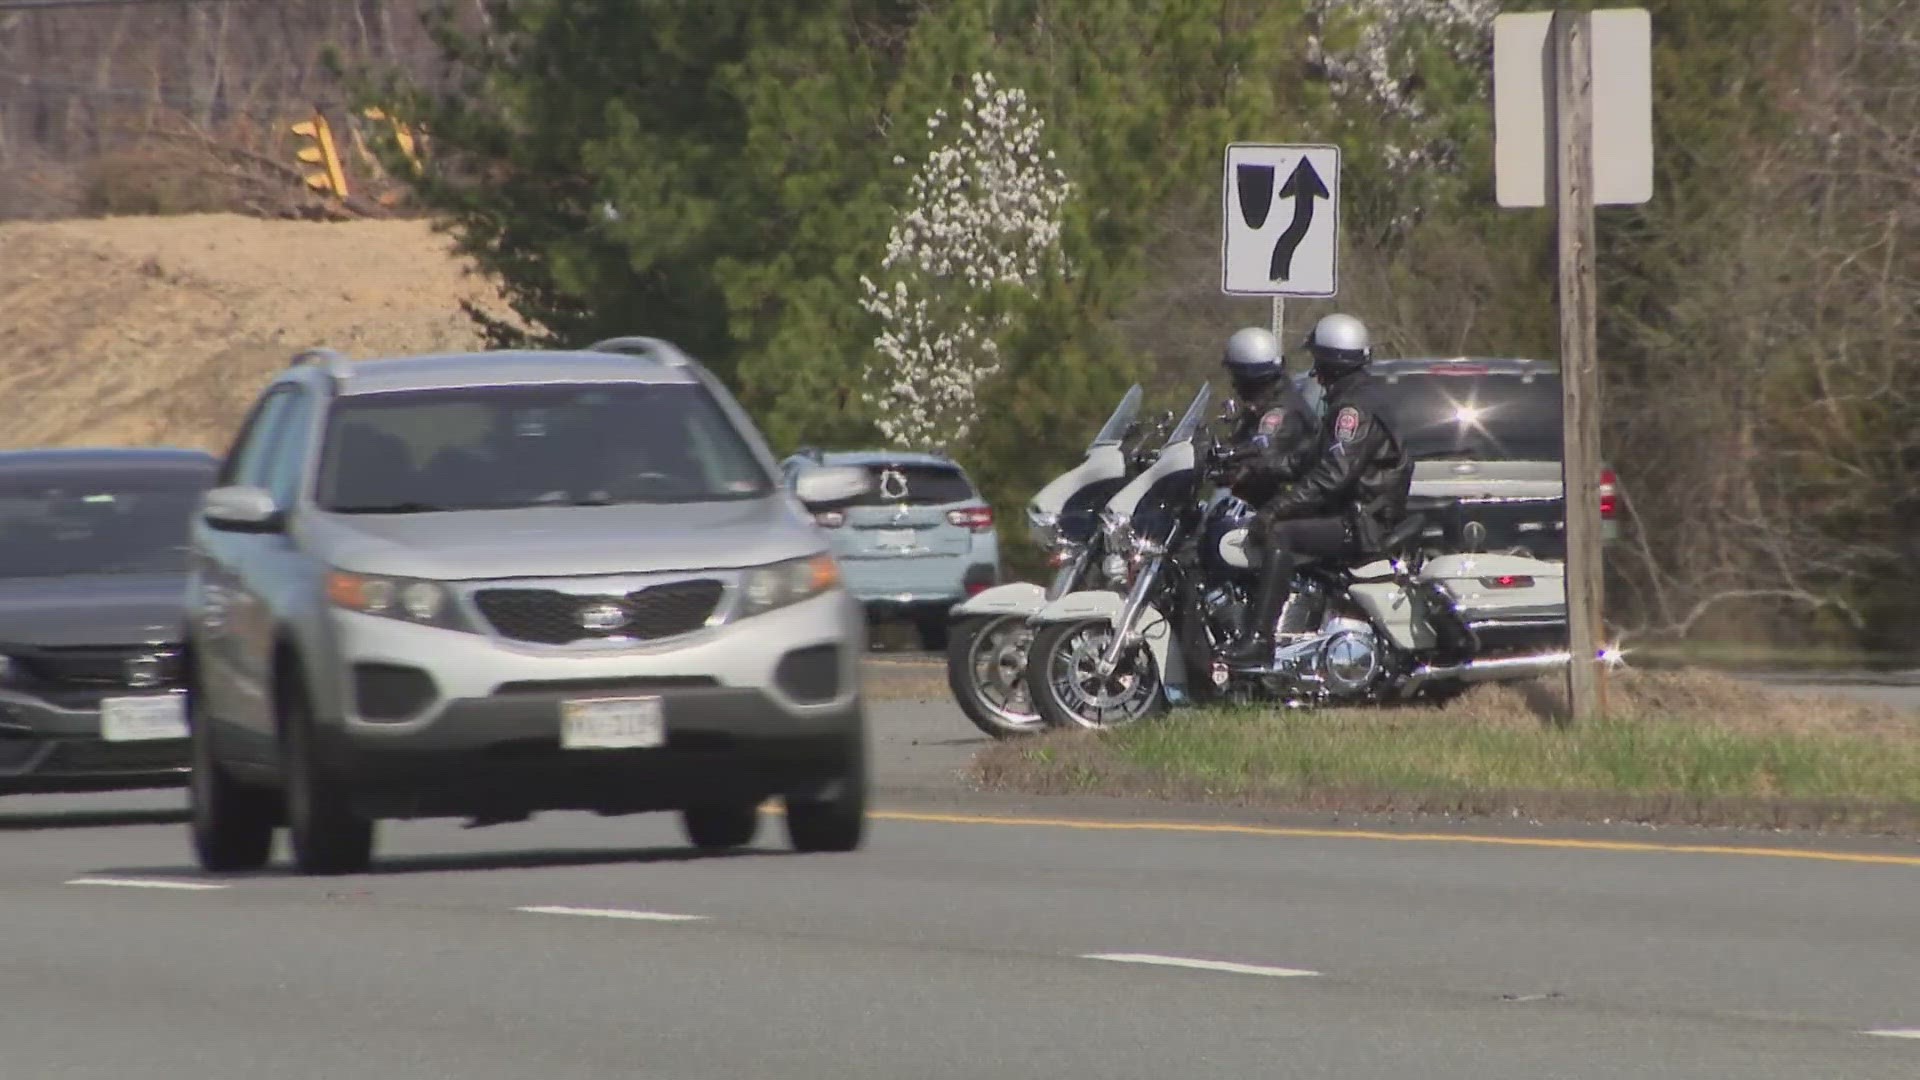 The campaign targets speeders and reckless drivers. Here's what to expect.